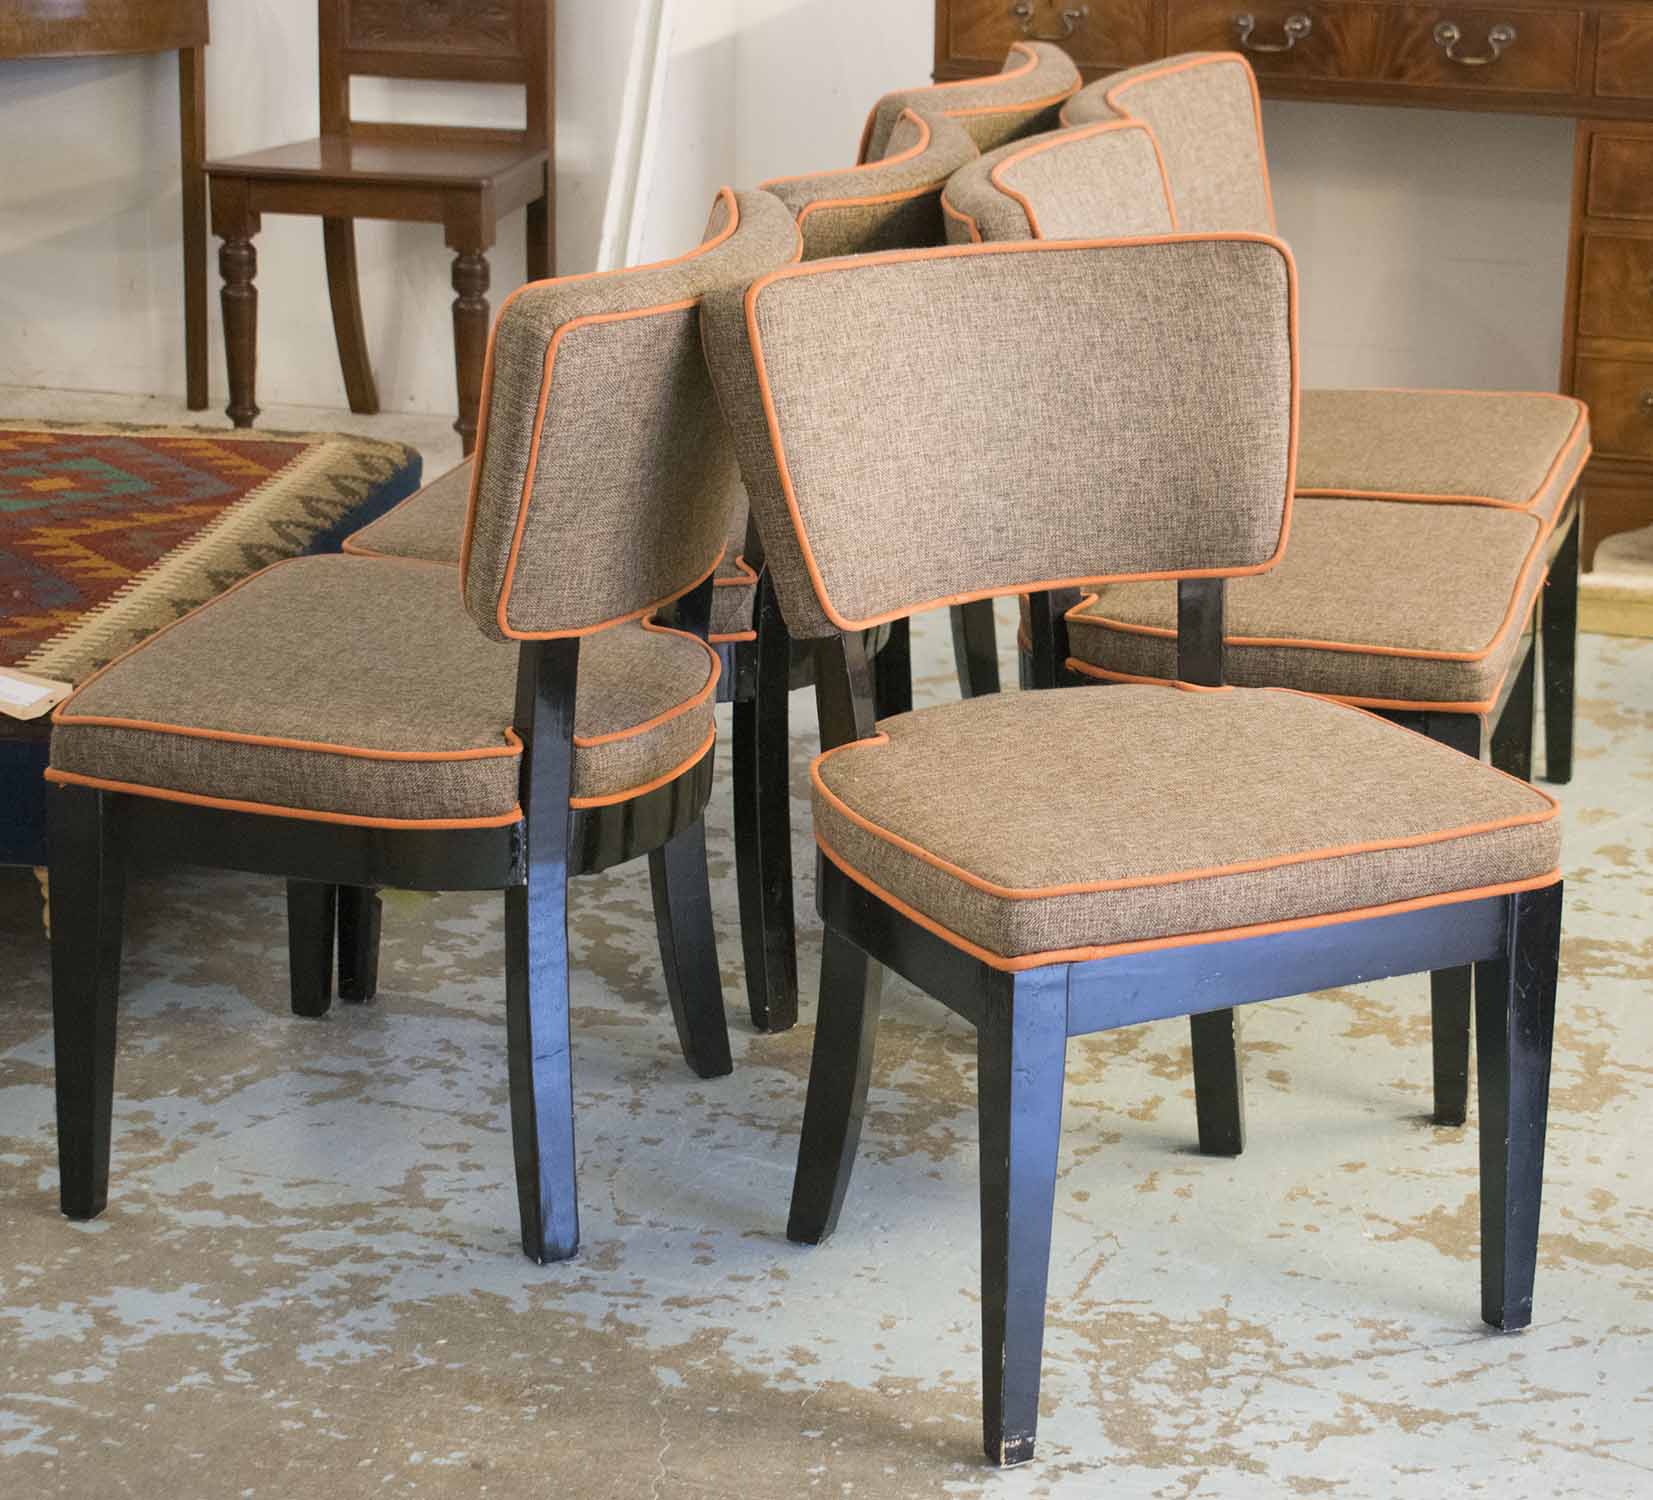 DINING CHAIRS, a set of six, black lacquered in brown fabric with orange piping.